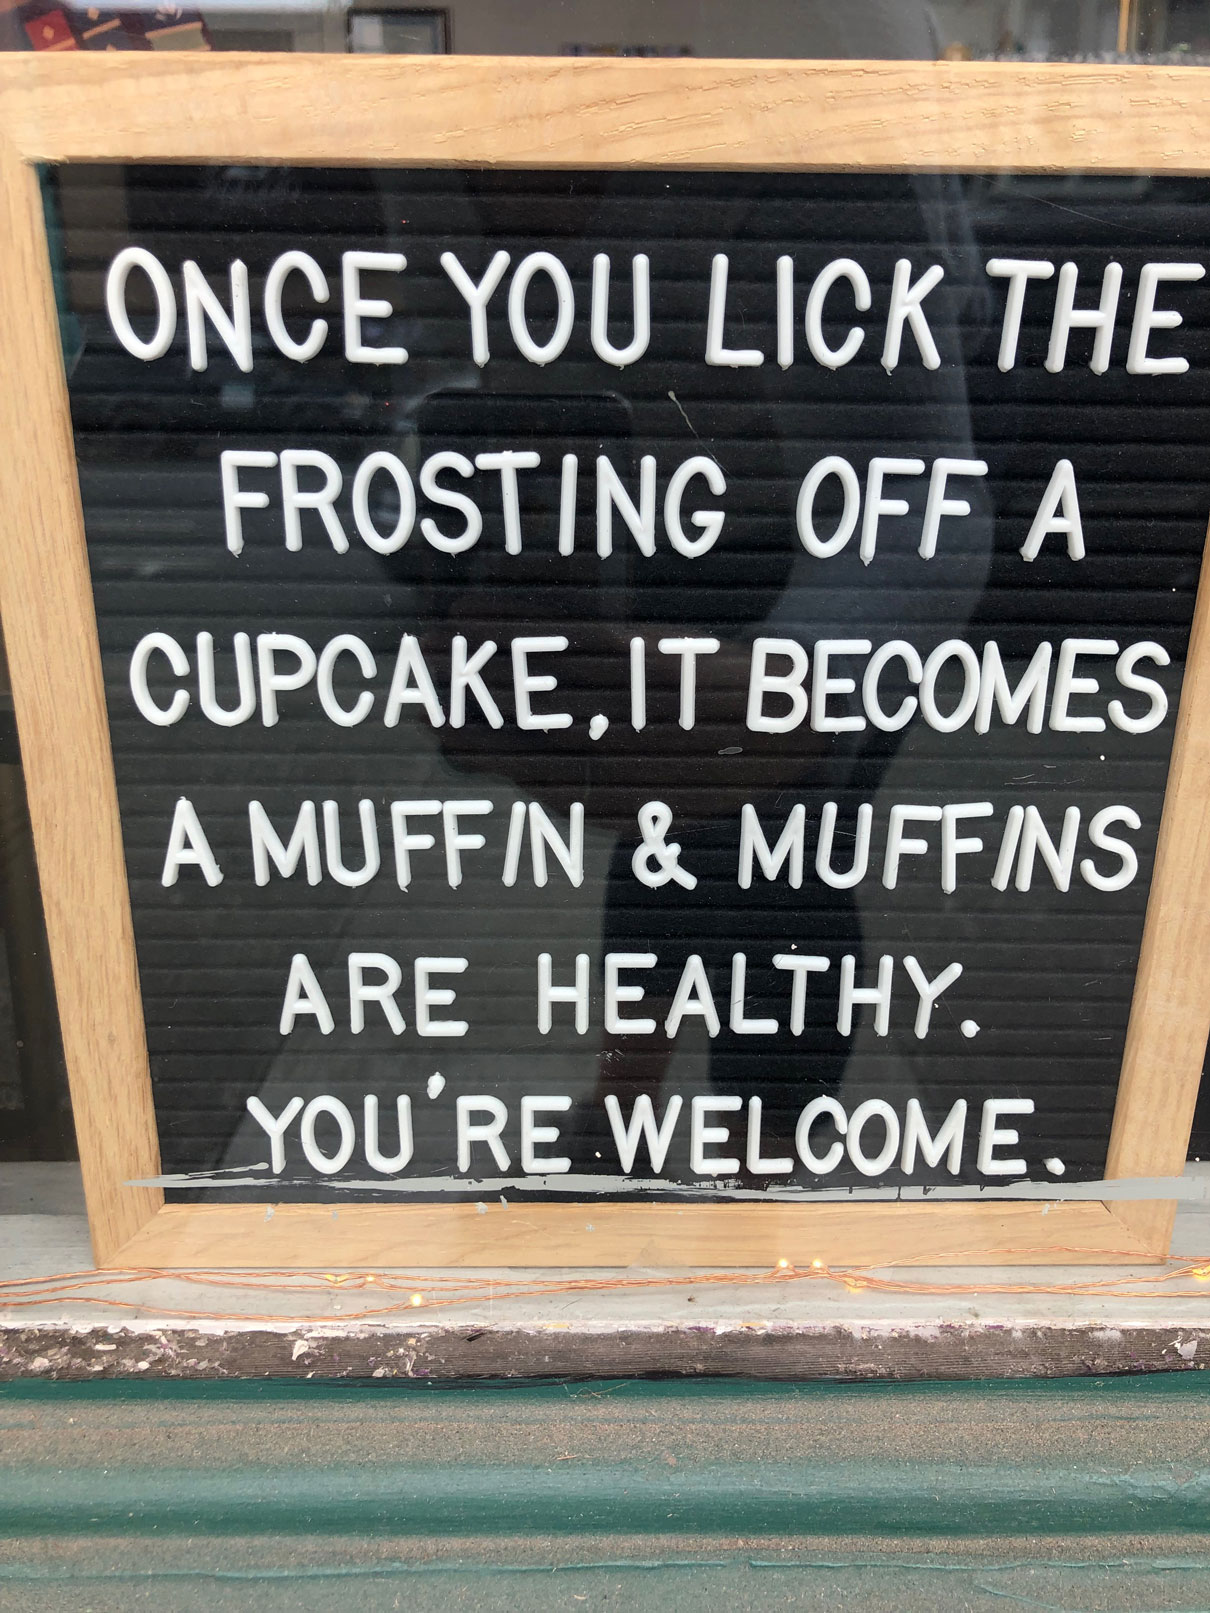 Once you lick the frosting off a cupcake, it becomes a muffin &amp; muffins are healthy. You're welcome.